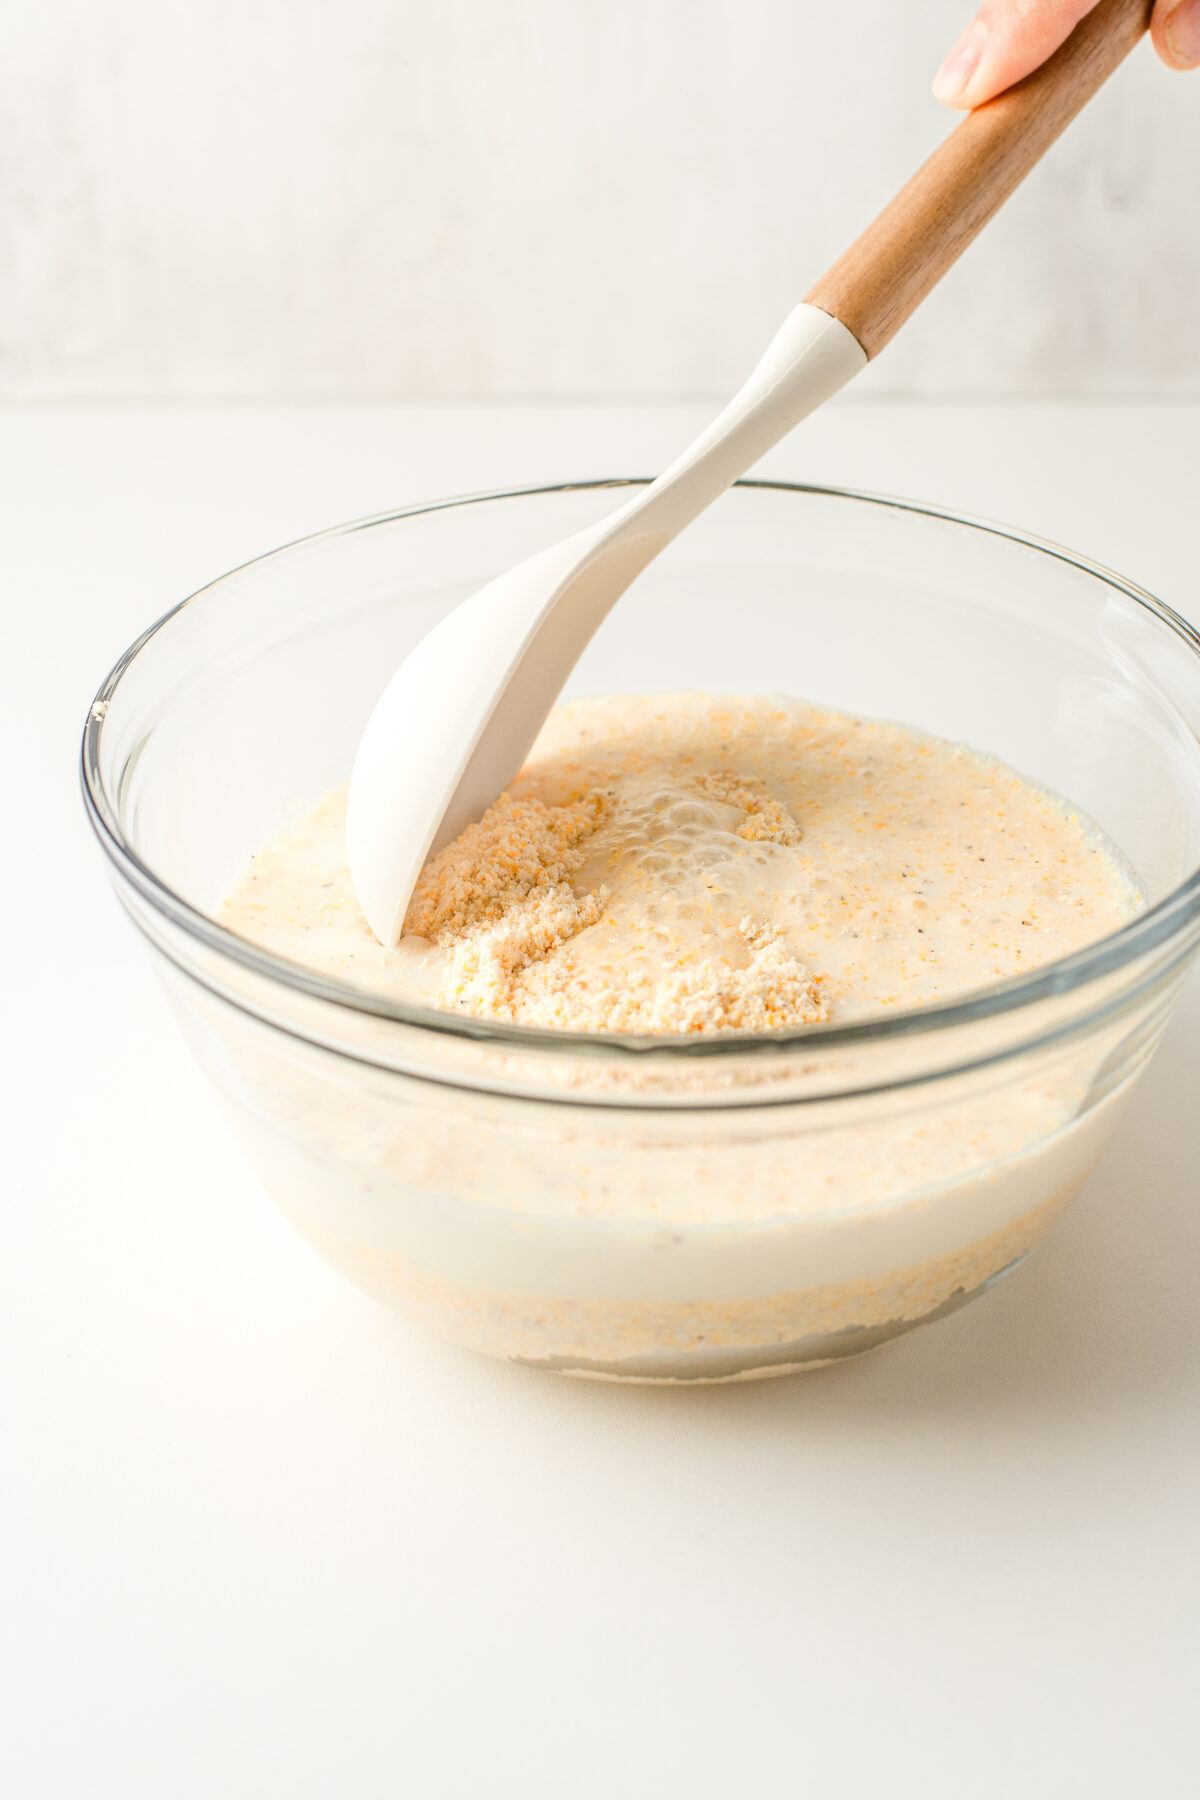 Cornmeal and milk being stirred together in a glass bowl.